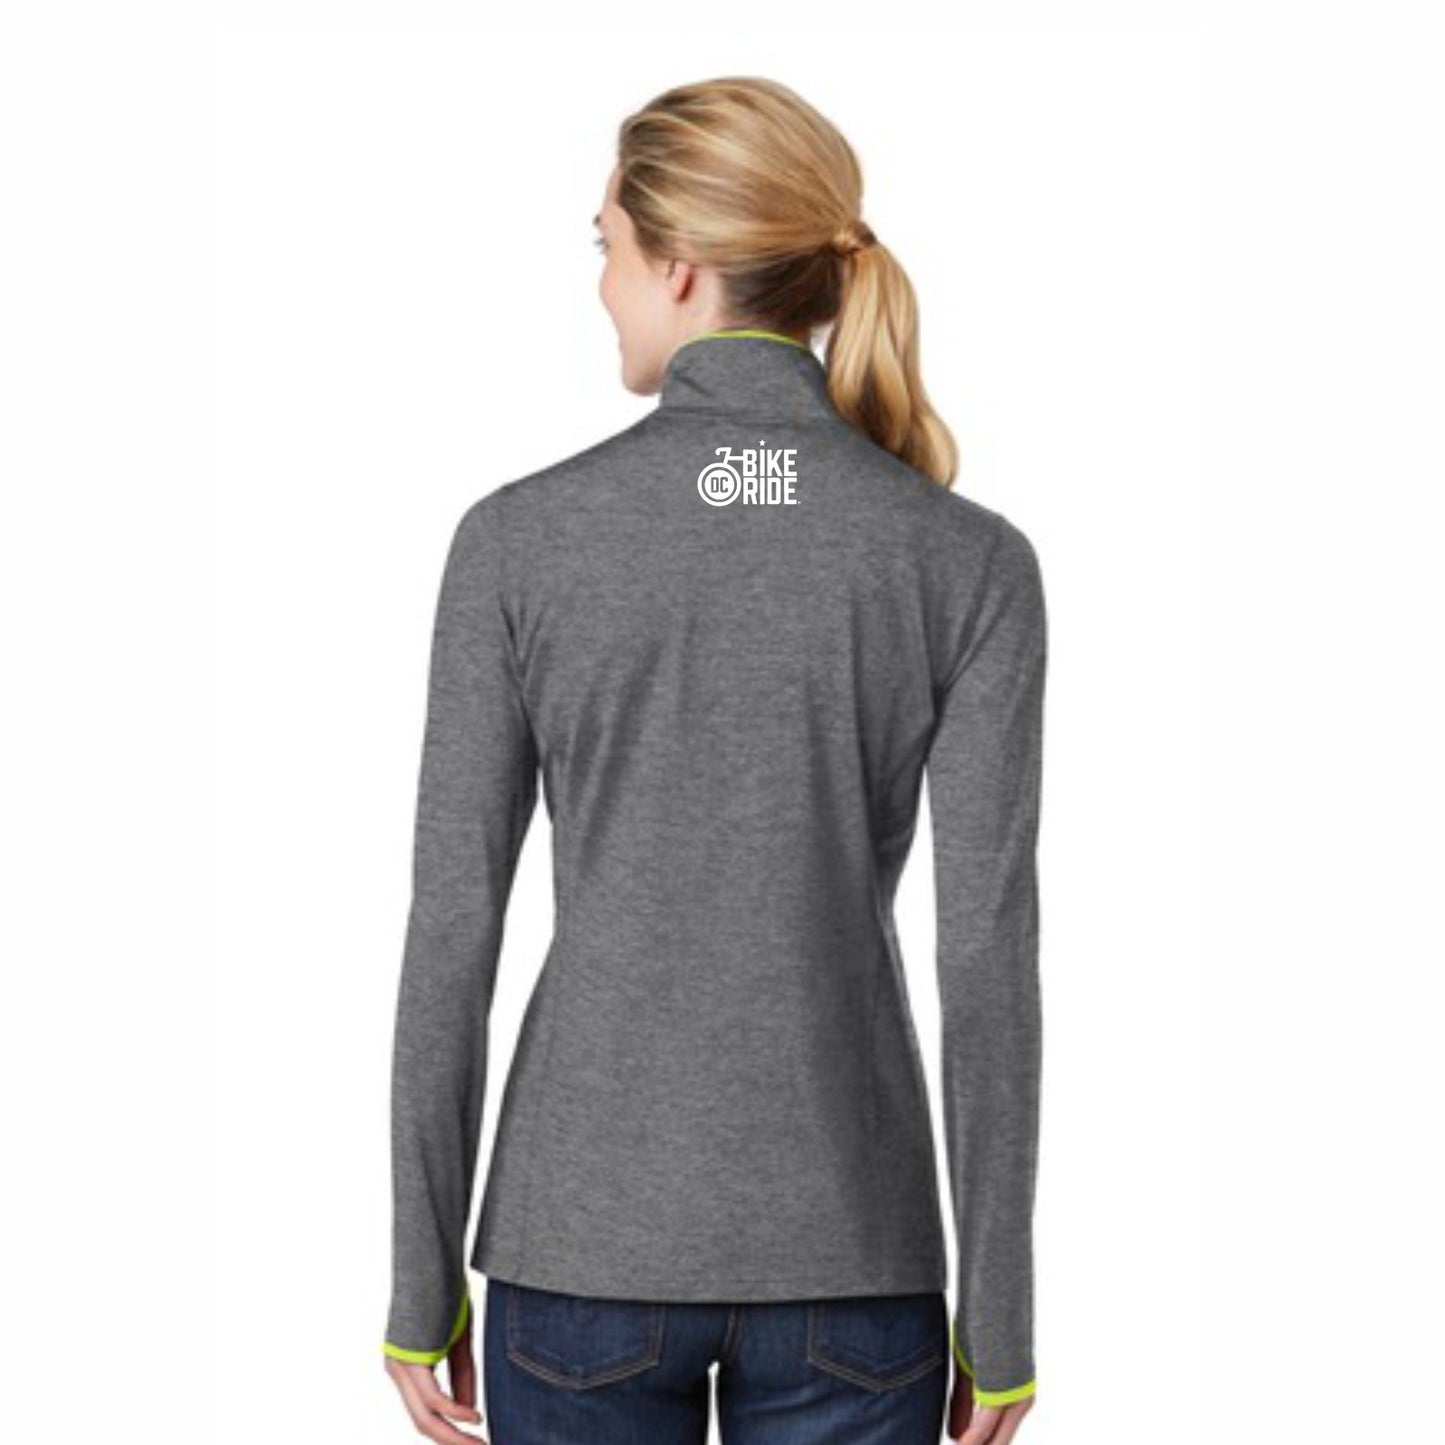 DC BIKE RIDE: Women's Stretch Zip Jacket - Charcoal / Charge Green - 'LCP' Design